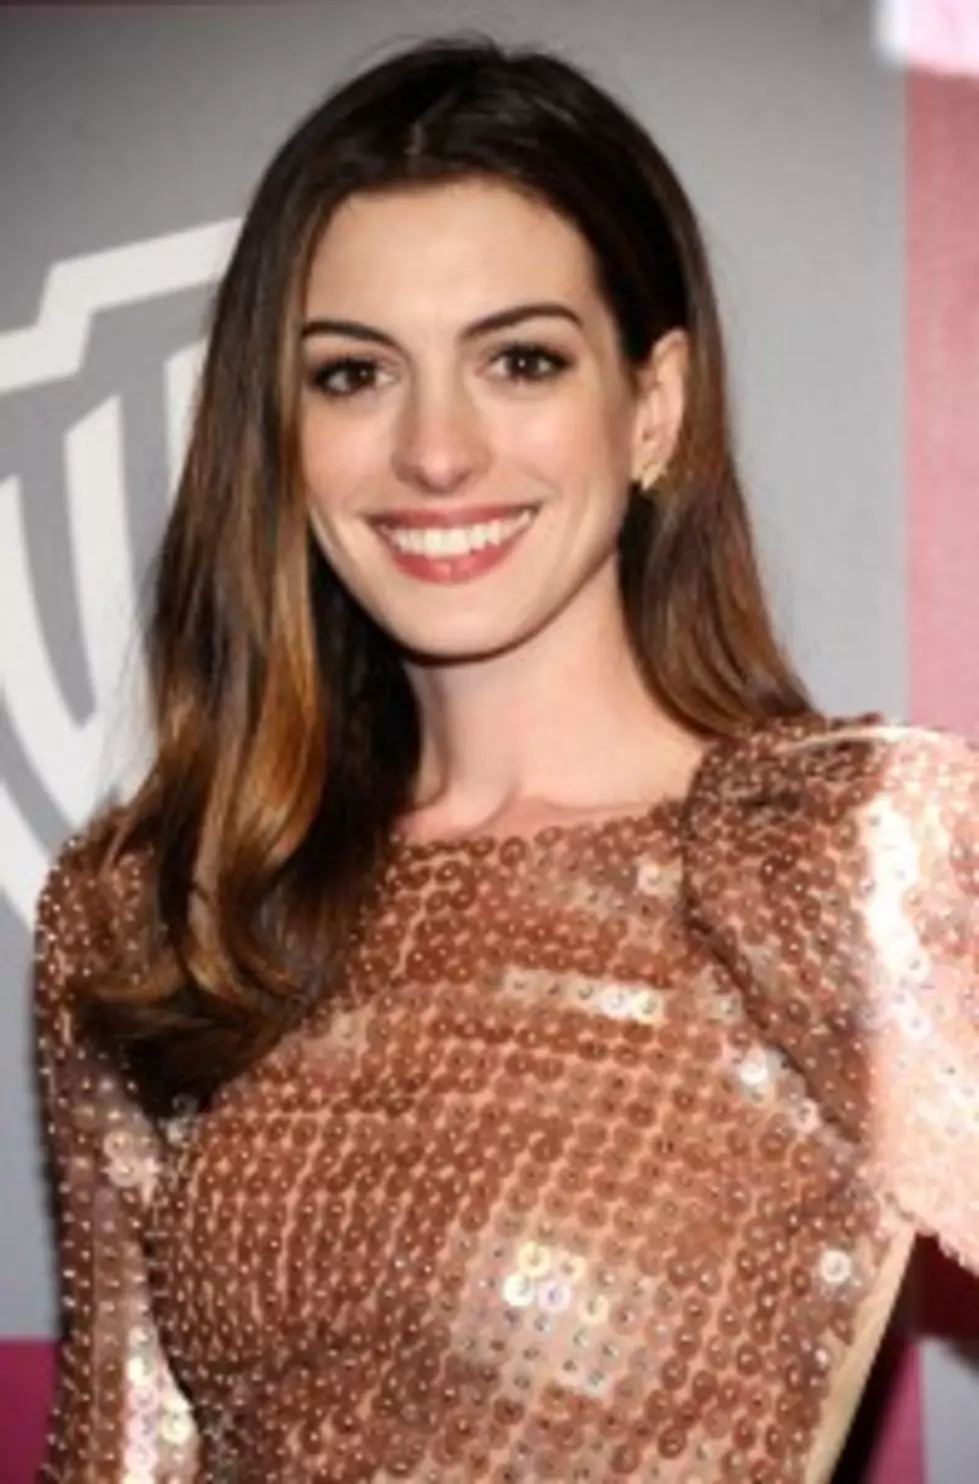 Anne Hathaway Is The New Catwoman